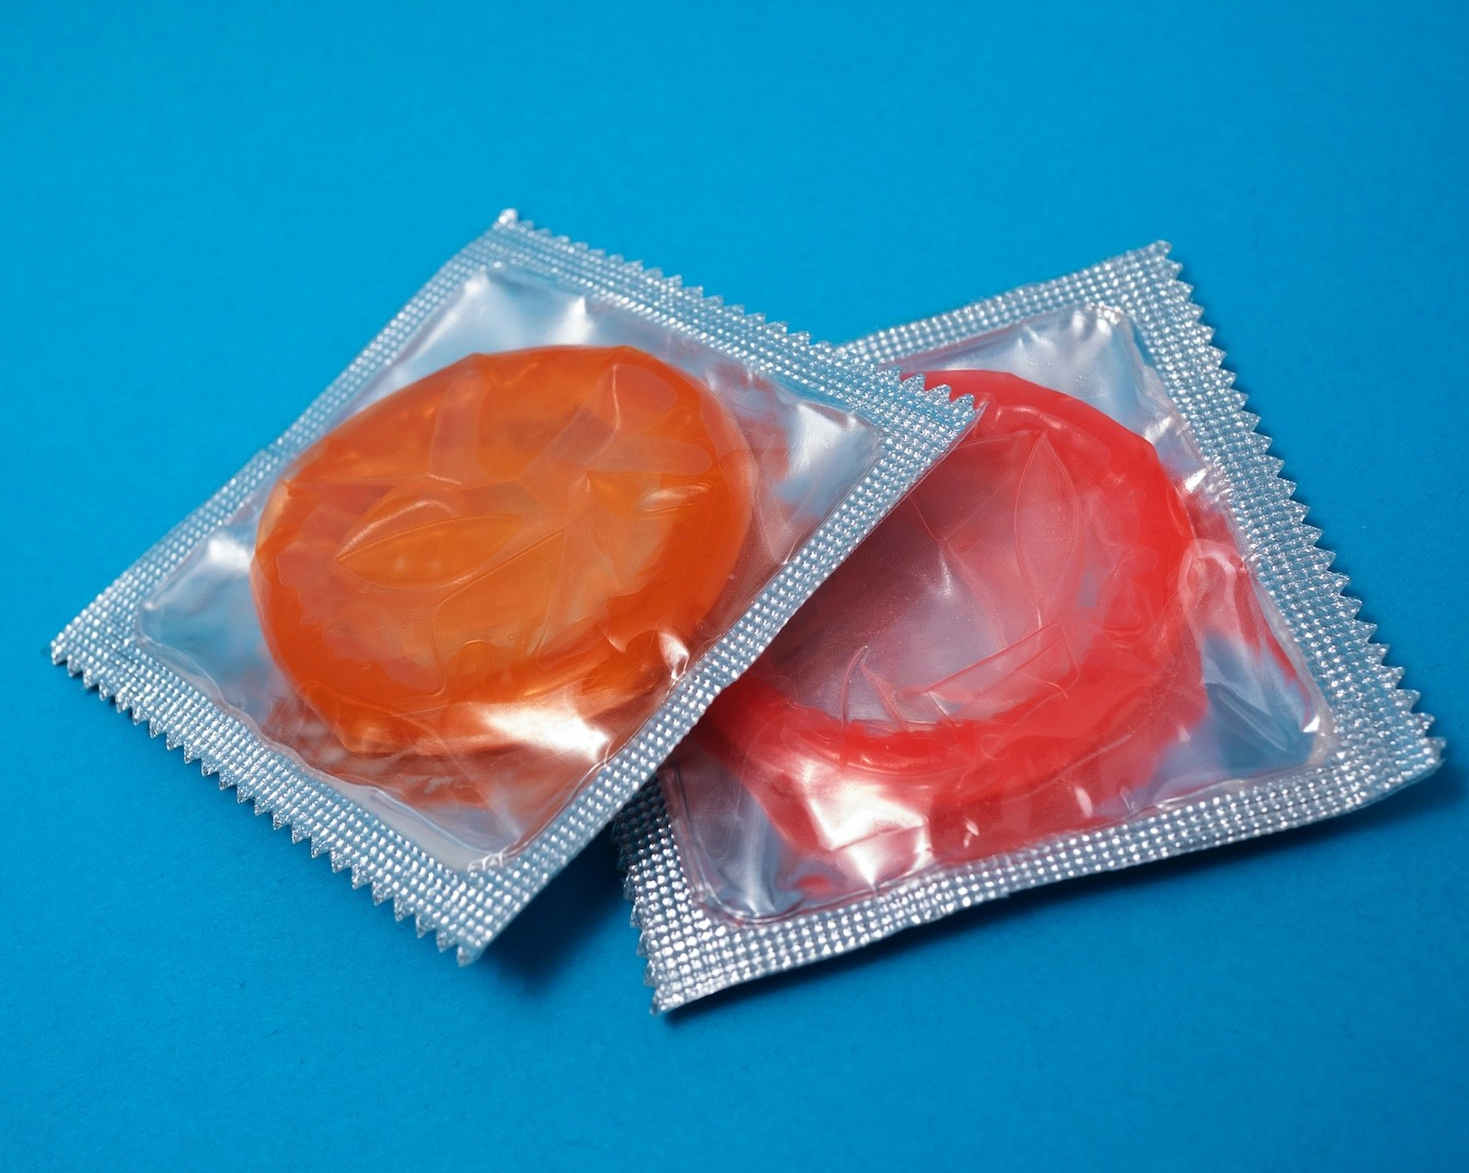 10 steps to using a condom properly